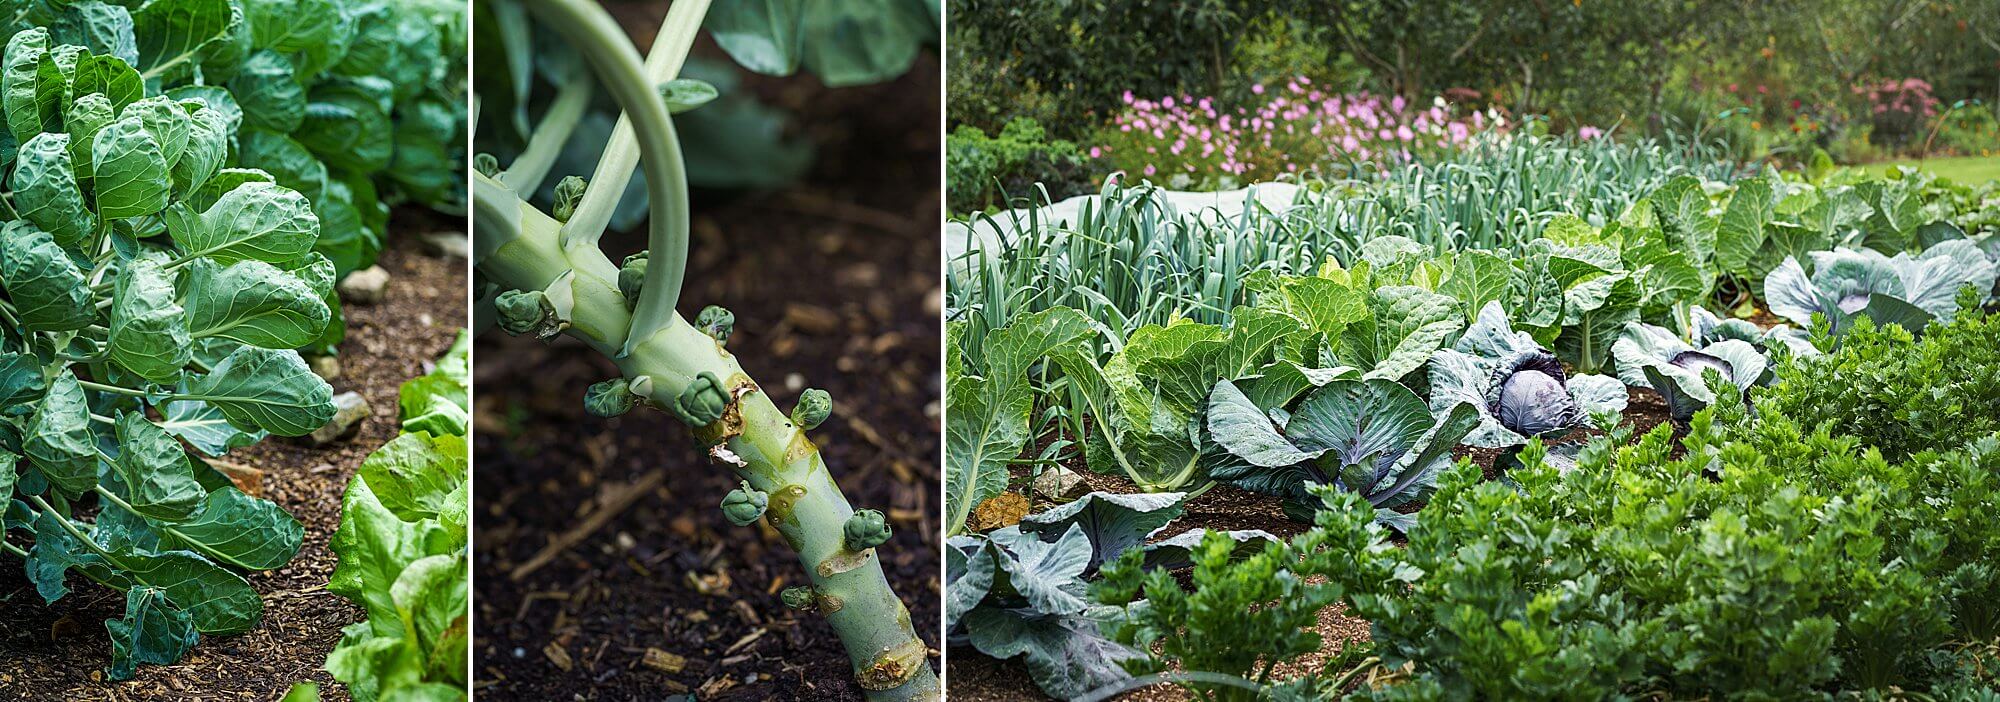 brassicas brussels sprouts and cabbages no dig garden